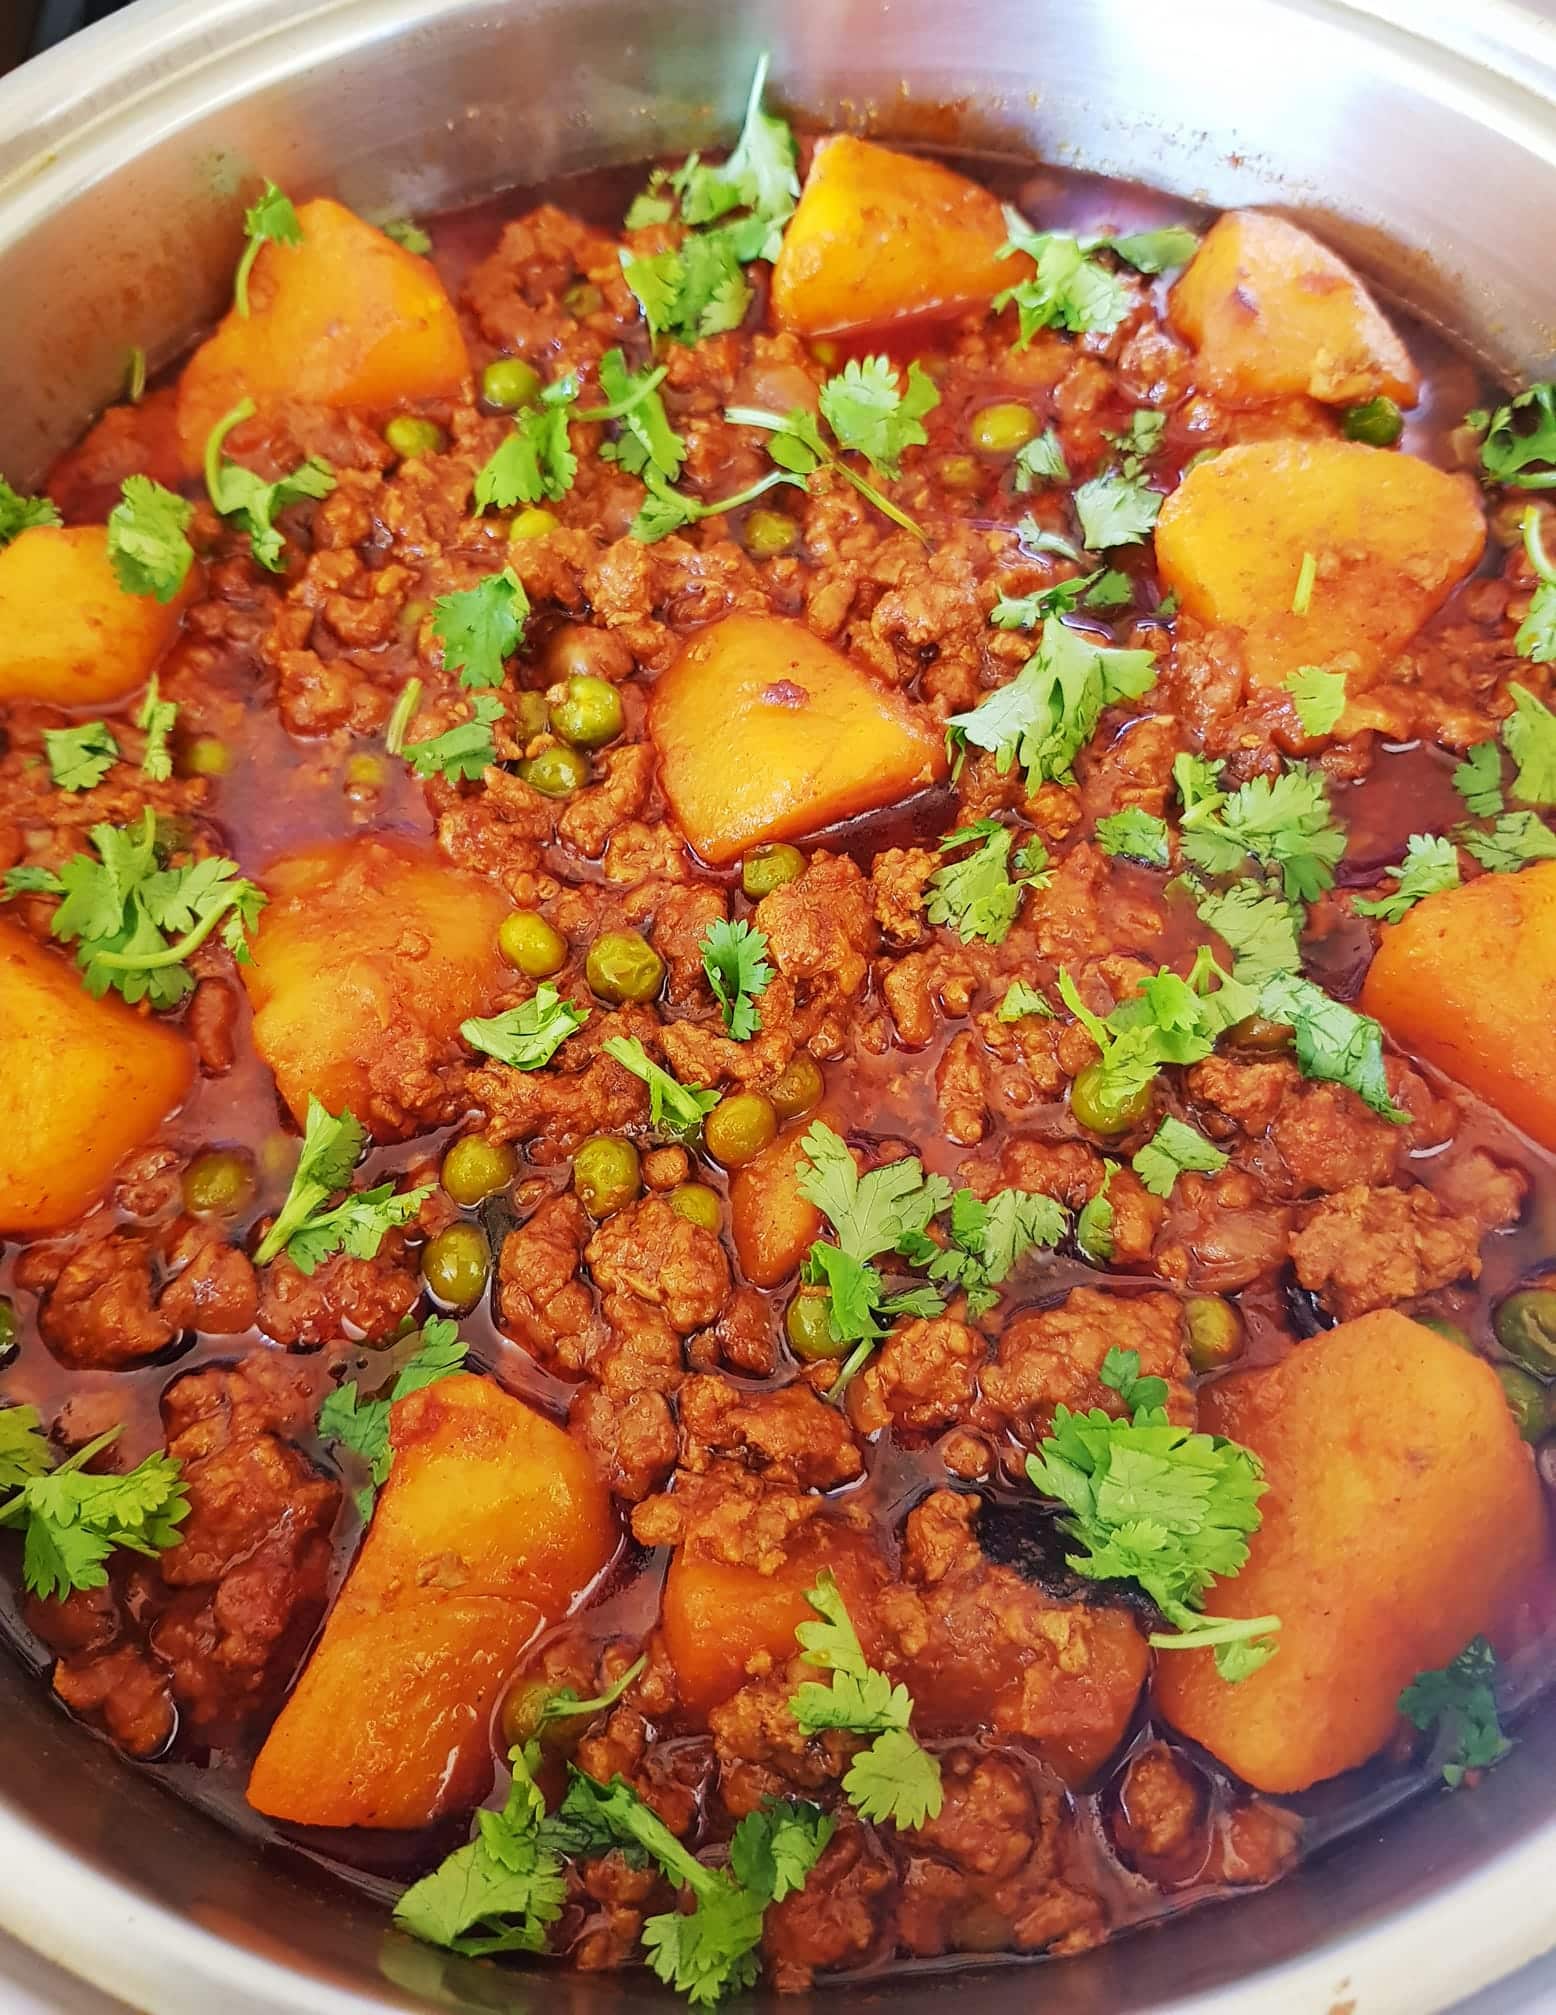 Mutton Mince Curry with Peas & Potatoes - Durban Curry Recipes